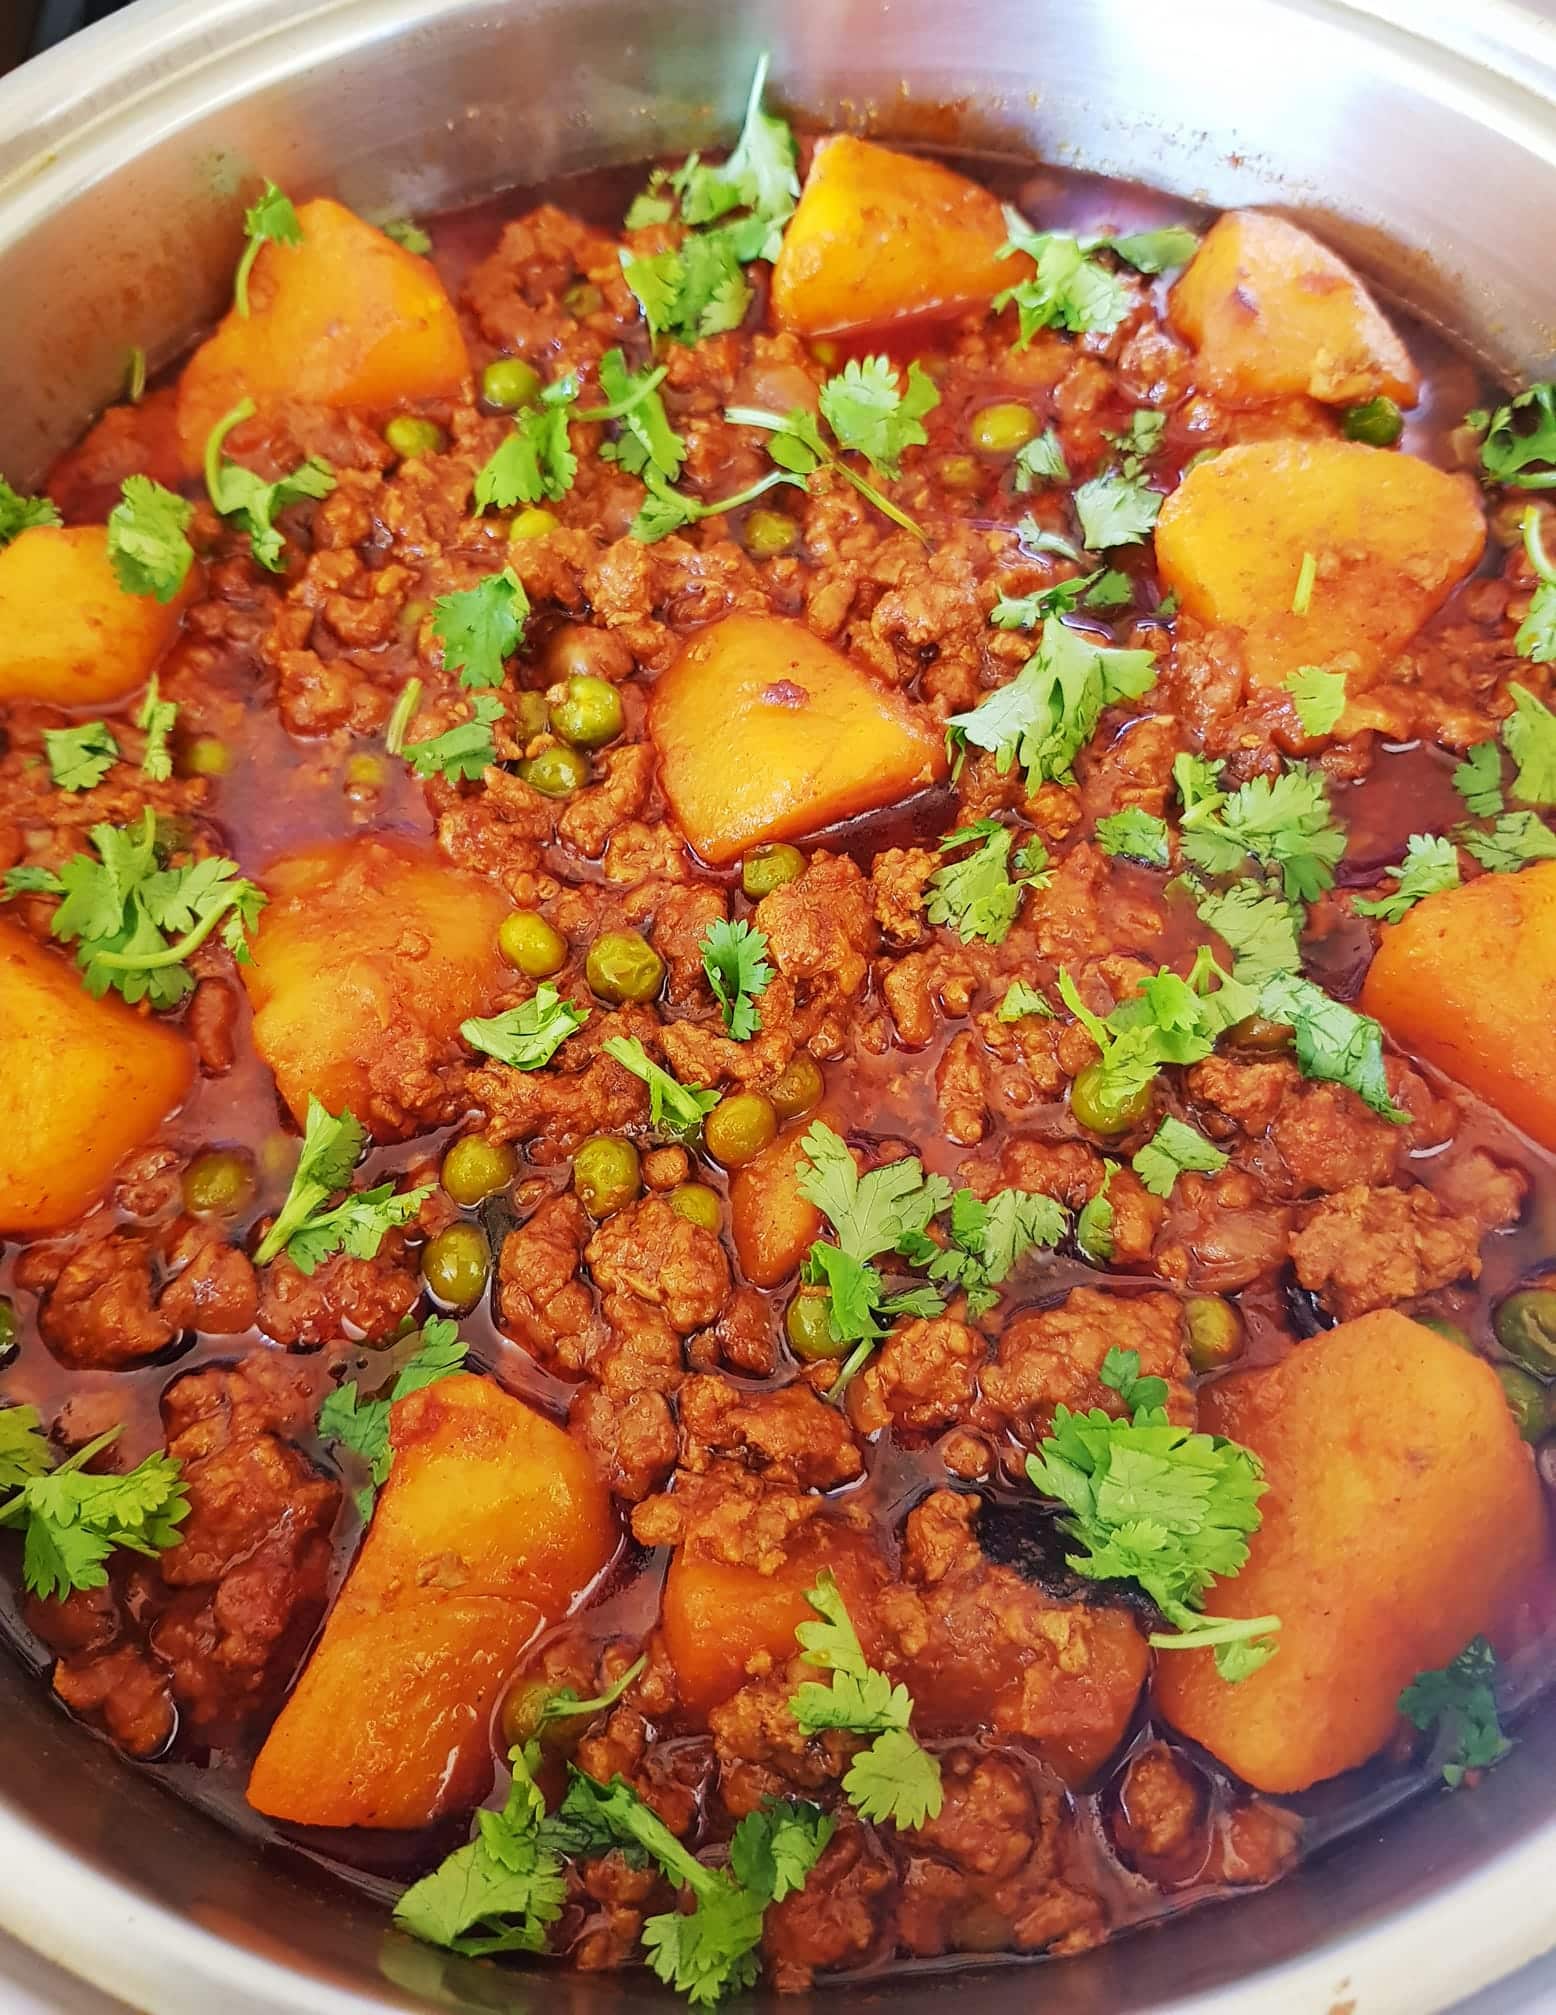 Mutton Mince Curry with Peas & Potatoes - Durban Curry Recipes